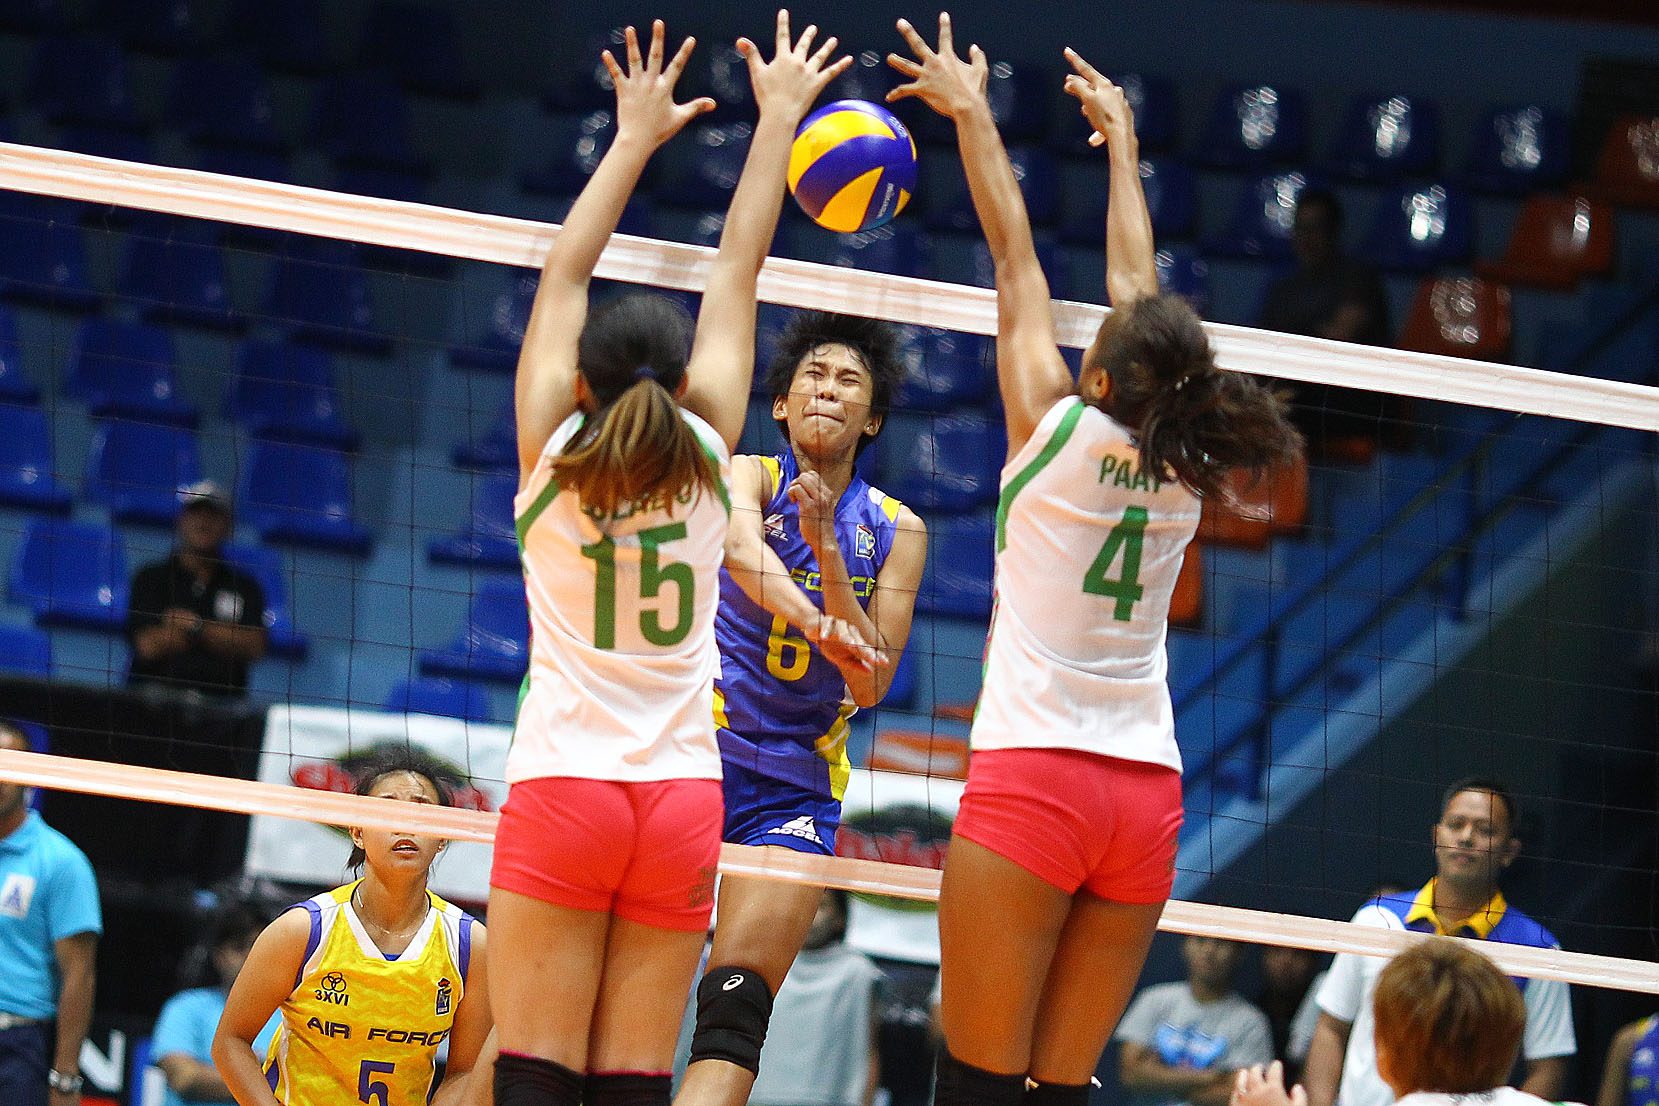 Air Force sweeps Laoag, draws first blood in V-league semis